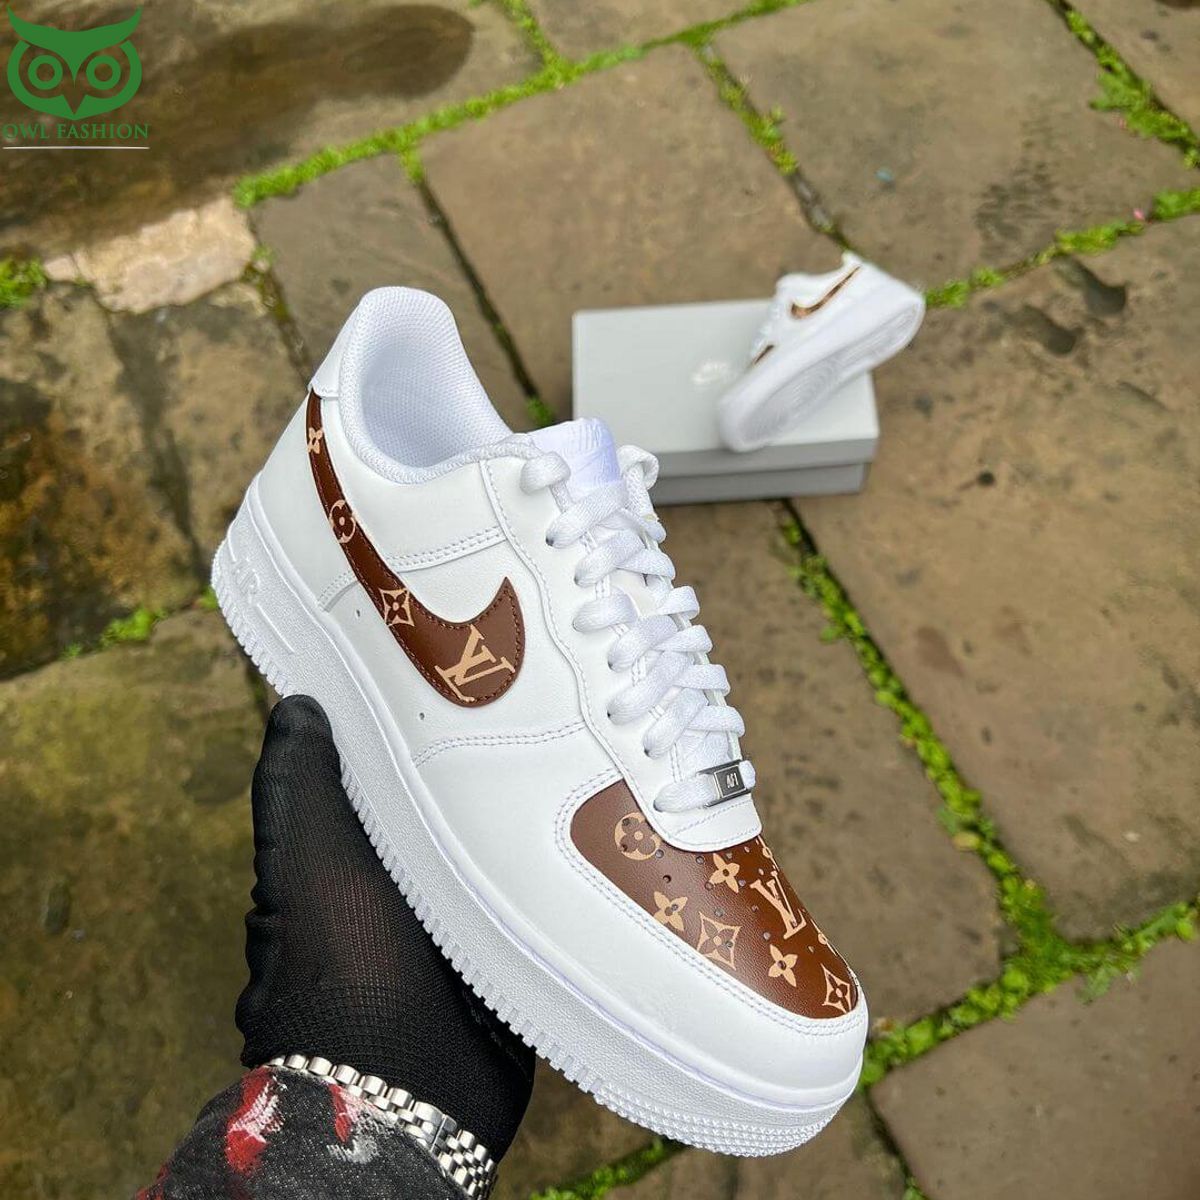 Brown and cream Louis Vuitton Air Force 1 Custom This place looks exotic.